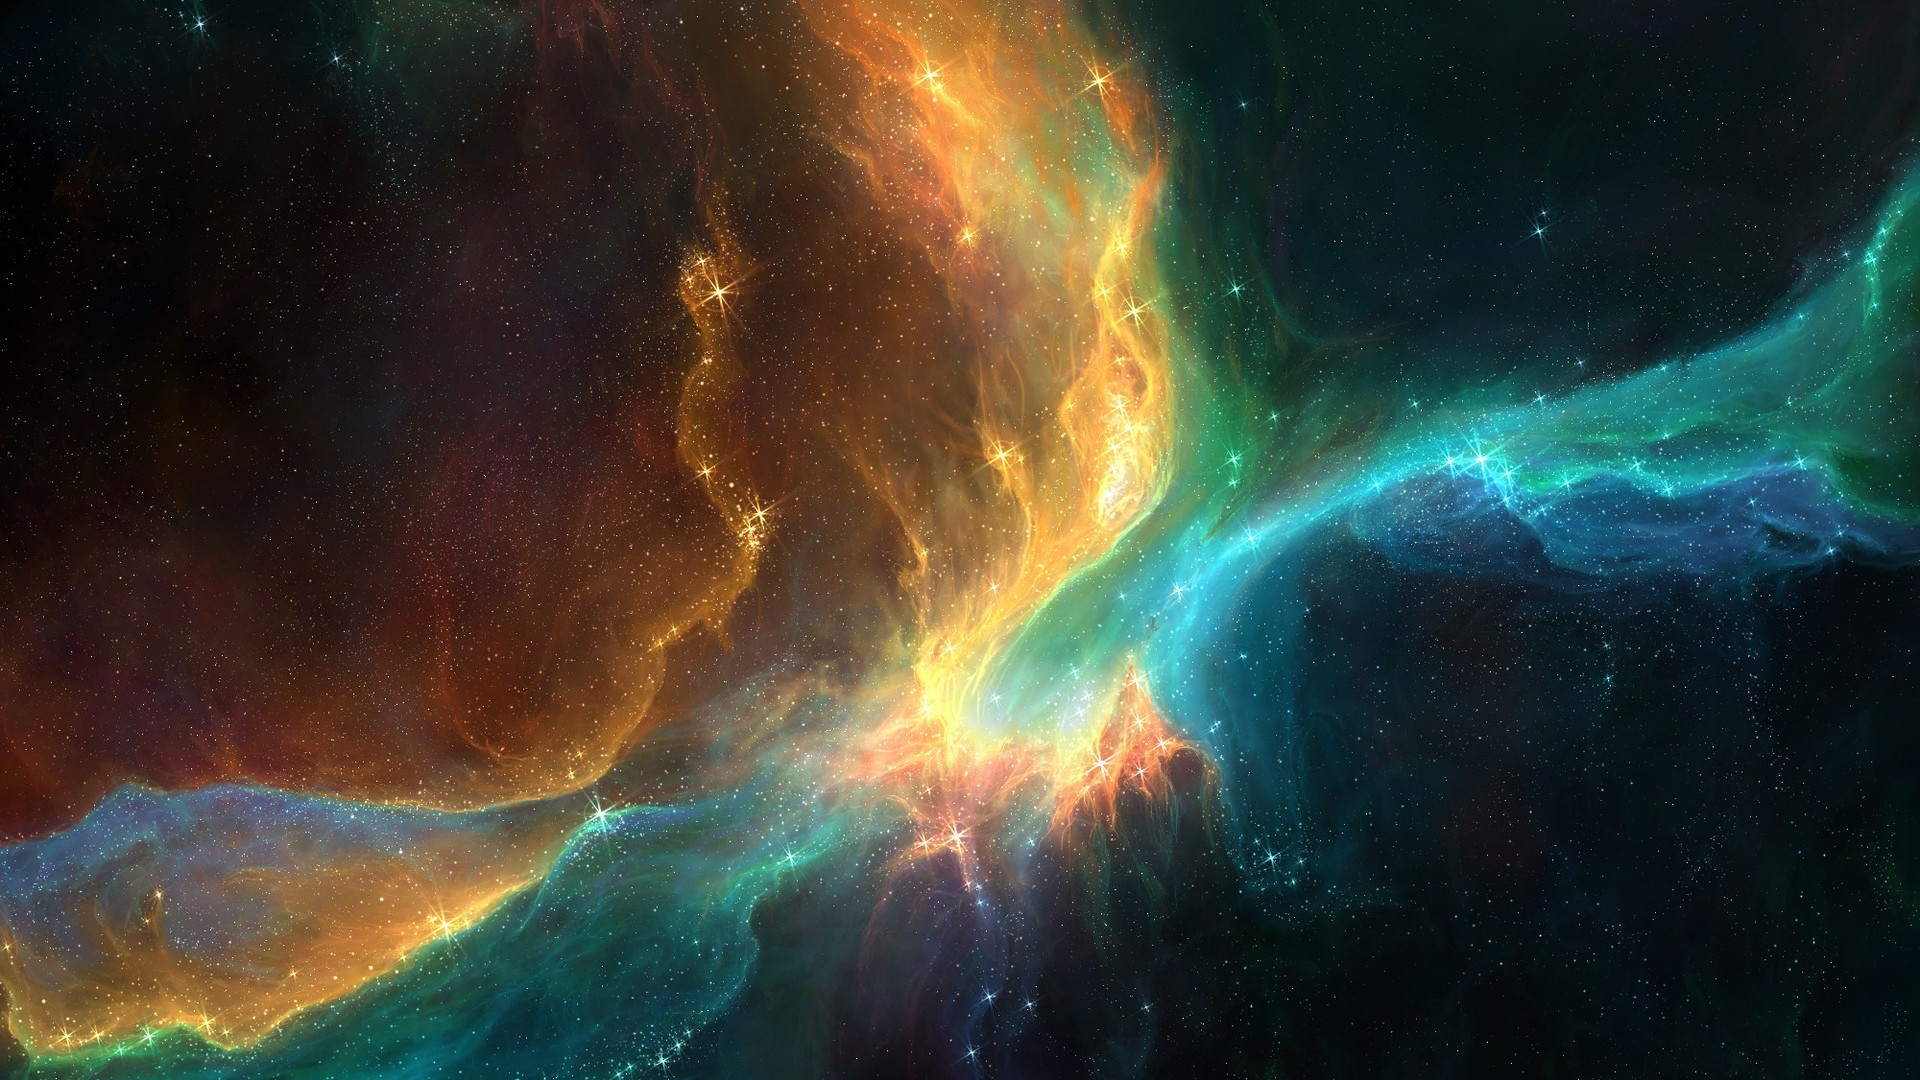 Outer Space PC Wallpaper